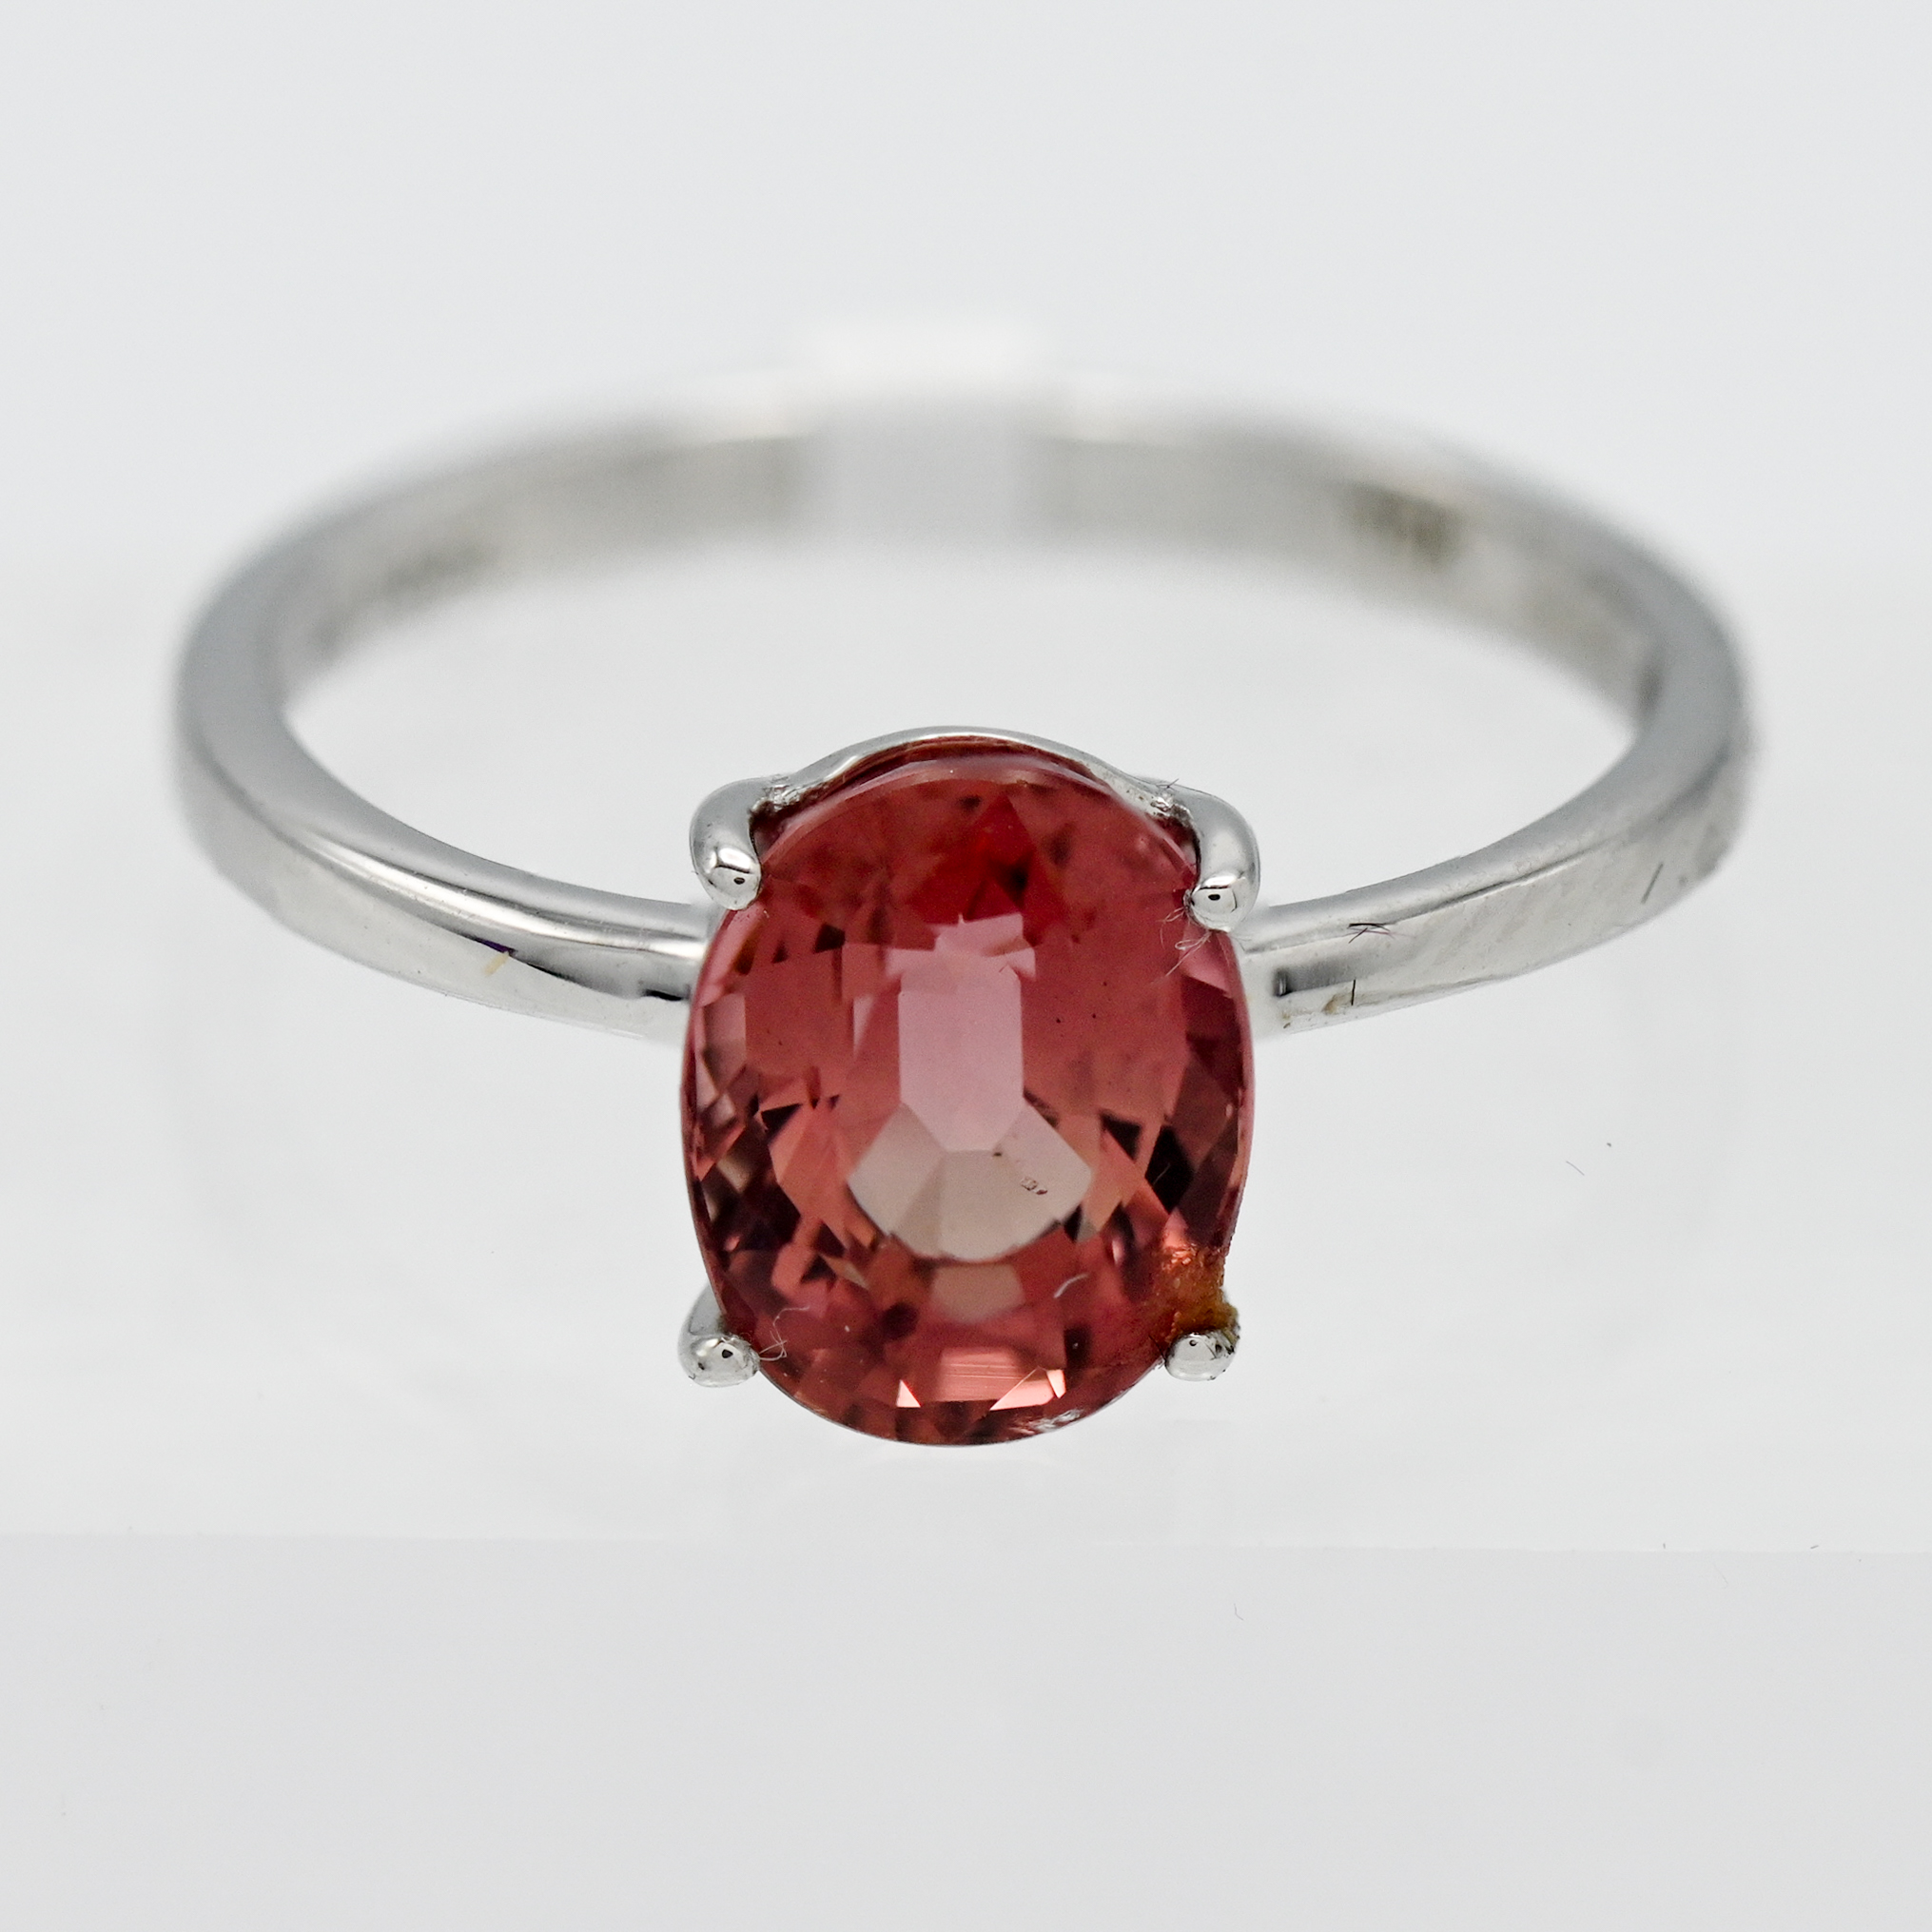 Gemporia, a 9k white gold Blended Tourmaline ring, size O, with certificate of authenticity.